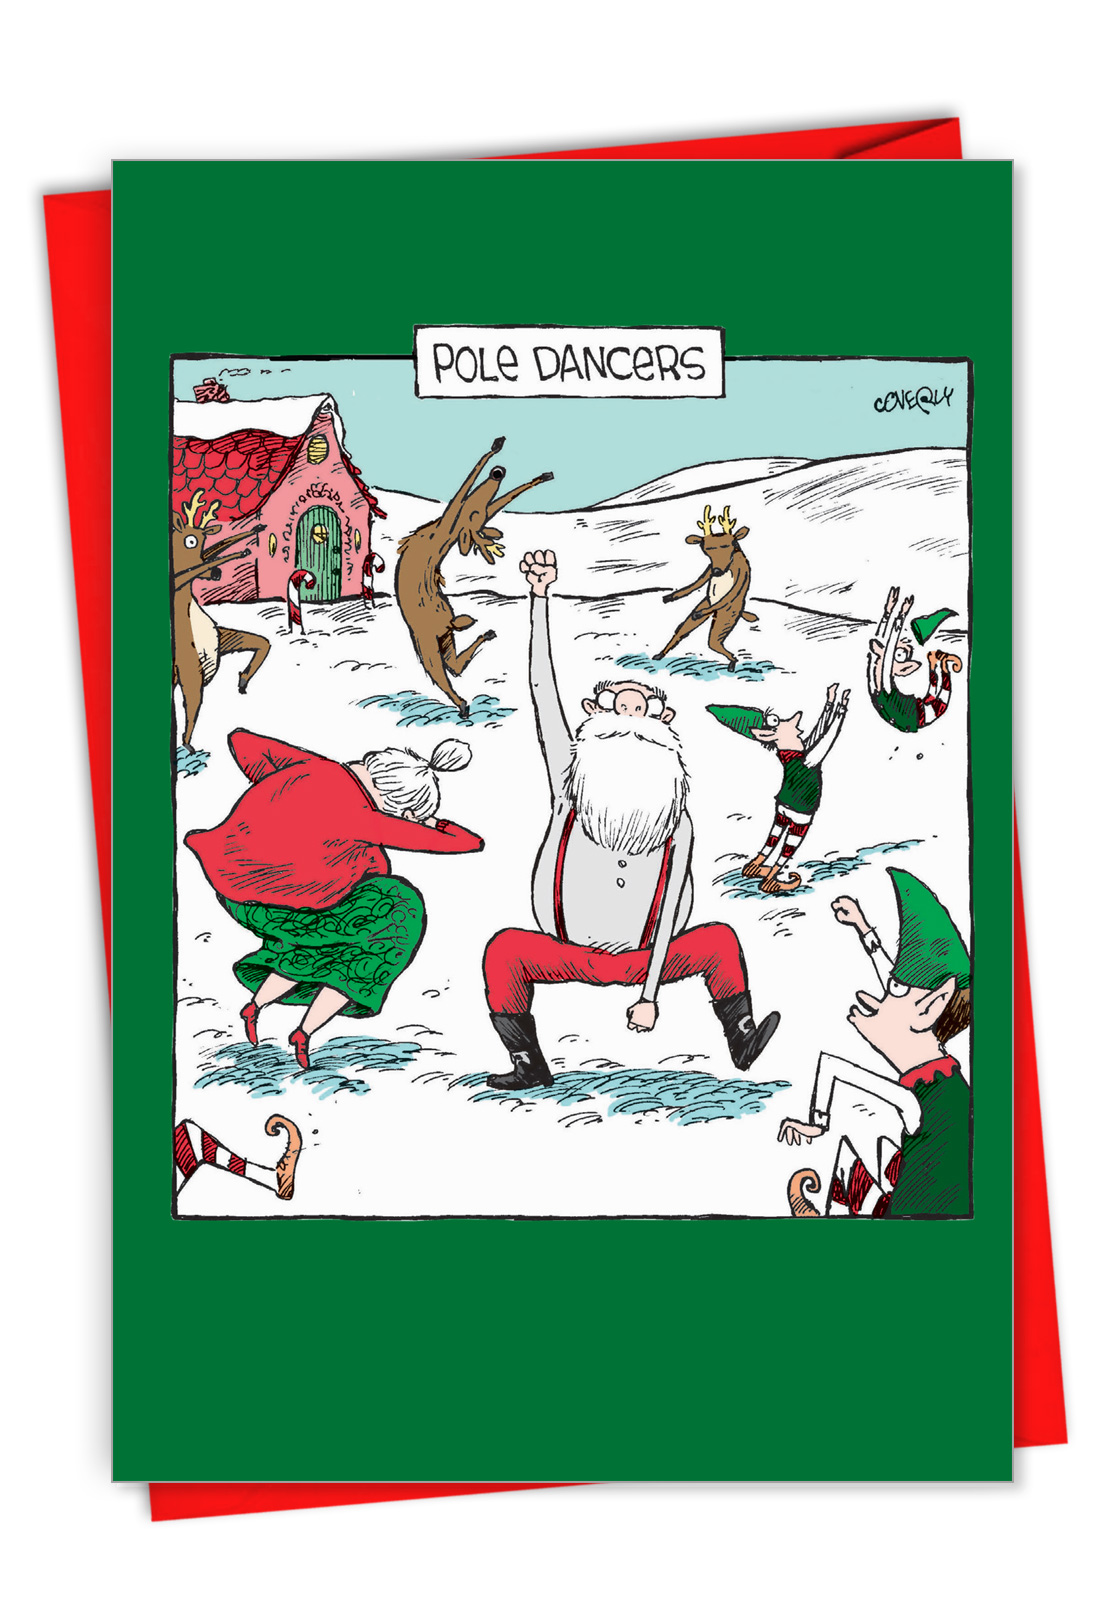 "Pole Dancers" humorous Christmas card from NobleWorks.